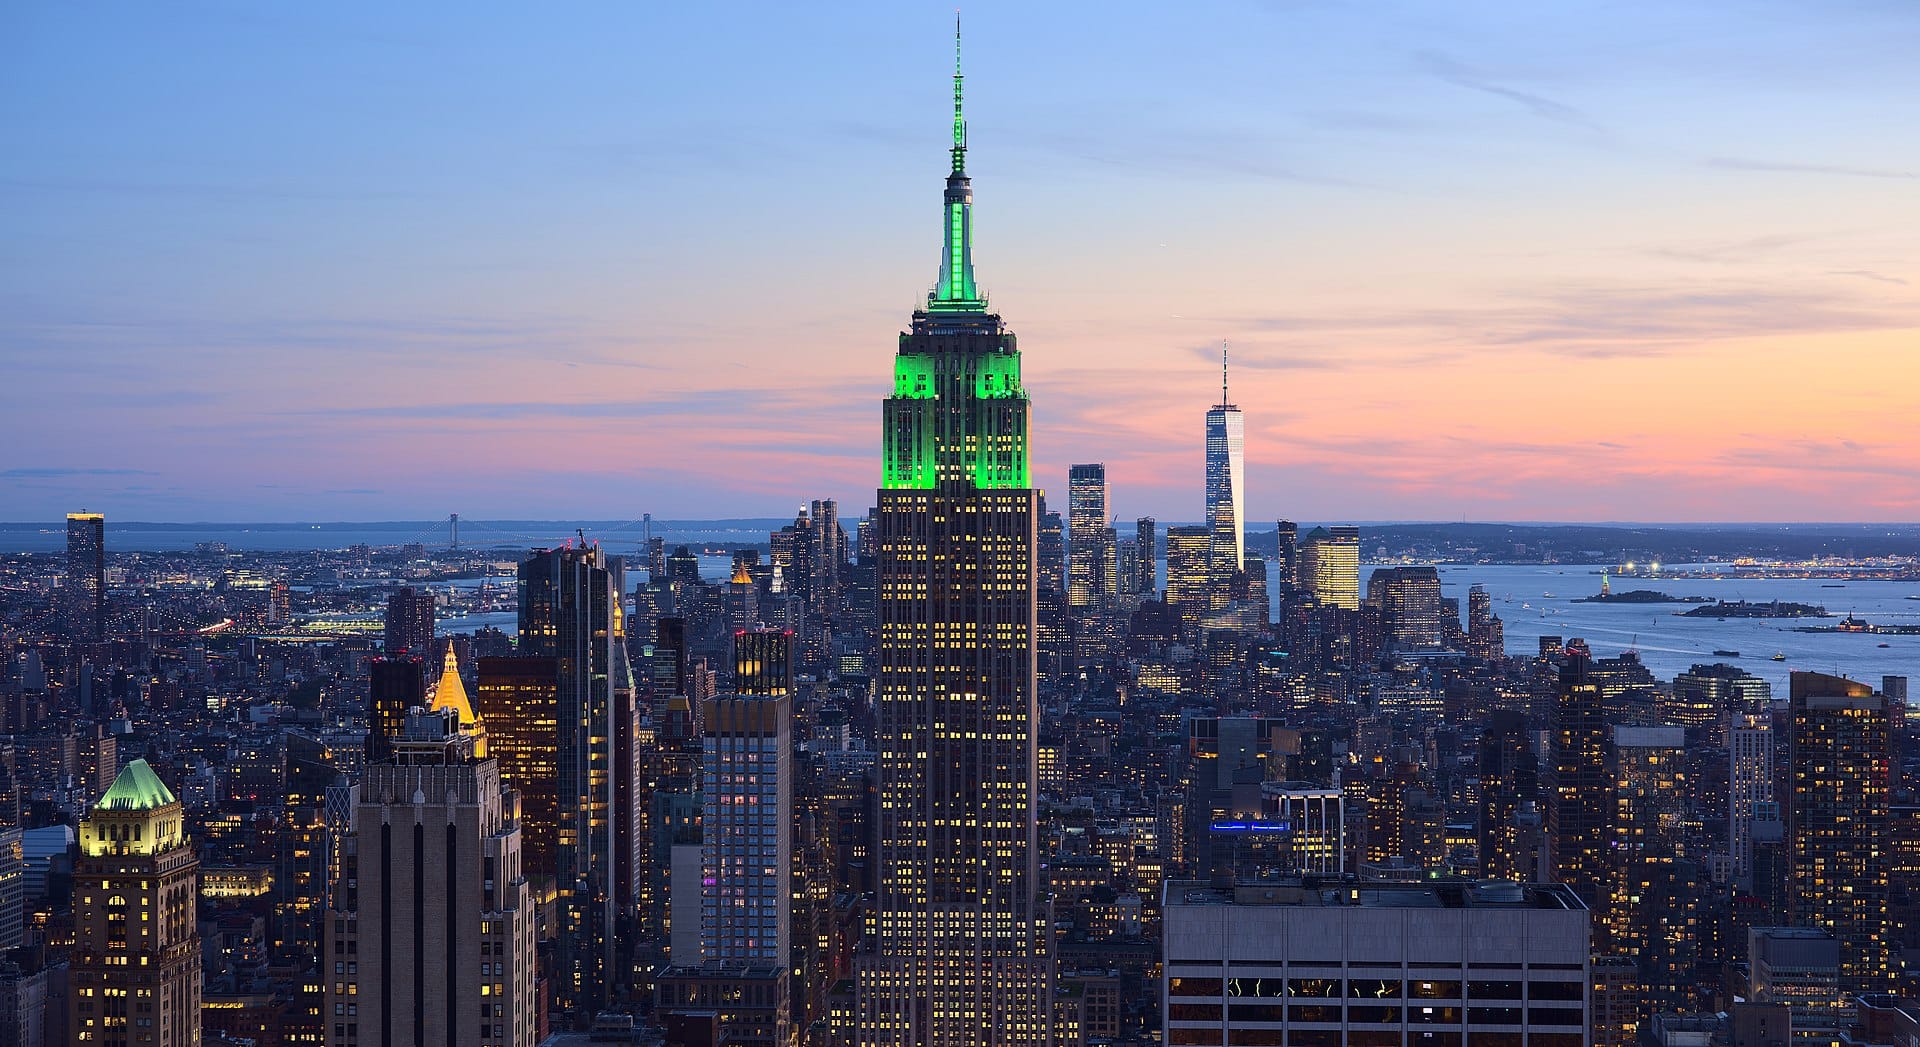 New York City. The Big Apple is a must-visit for any traveler to the United States. With its iconic landmarks like the Statue of Liberty, Times Square, and the Empire State Building, there's something for everyone in New York City.